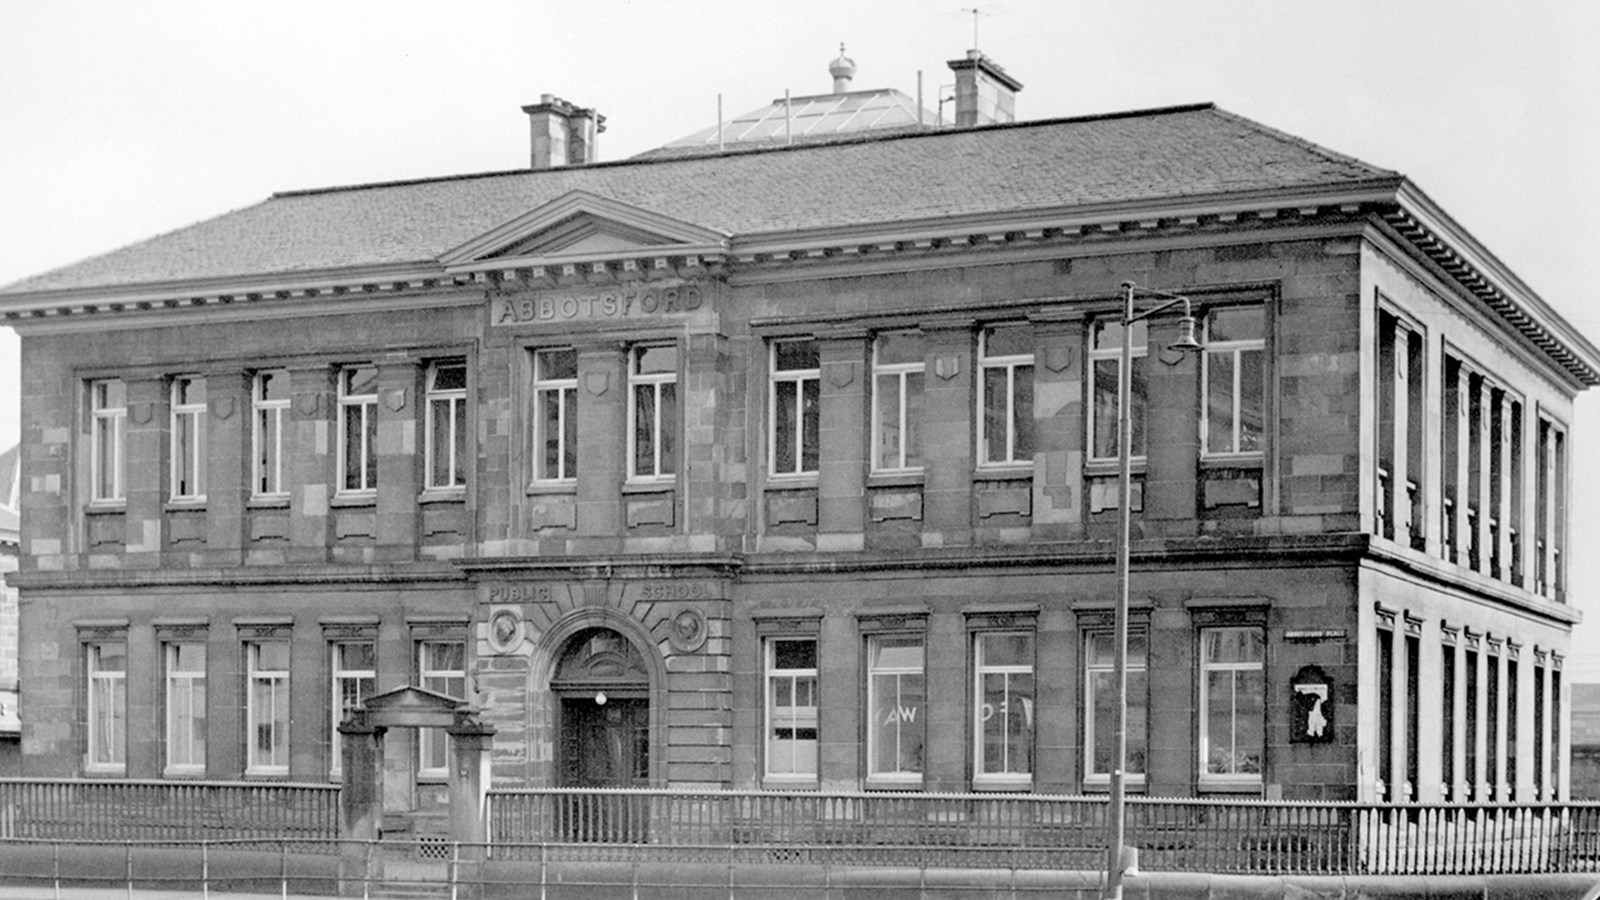 A black and white photo of three story Abbotsford School (1879) with white window frames and an arch entry via the main gates.